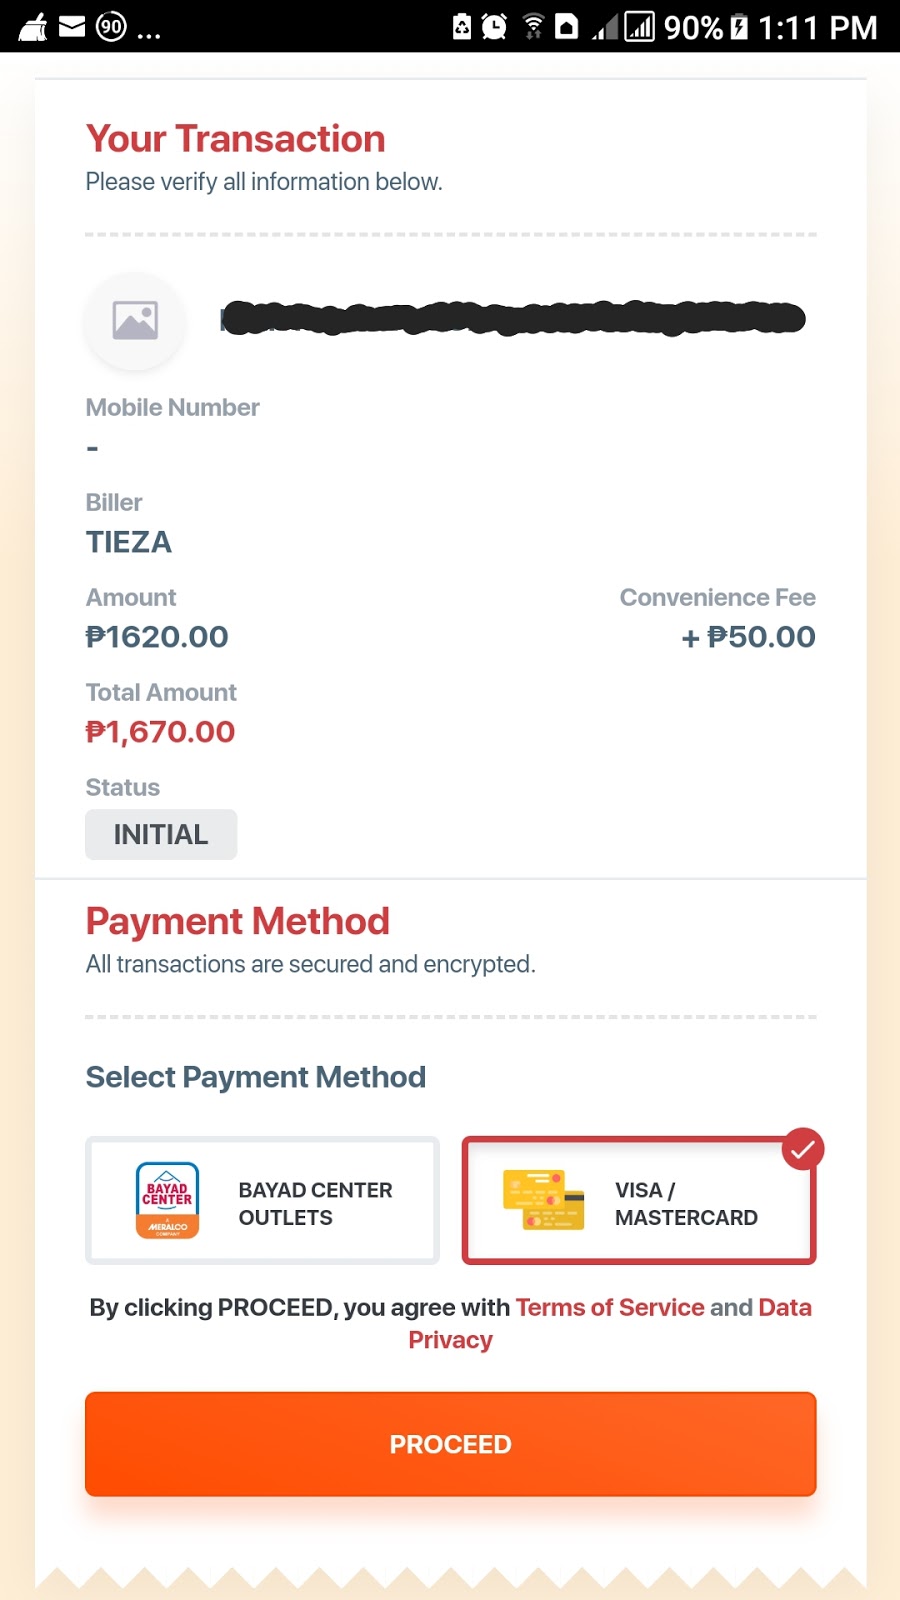 philippine travel tax where to pay